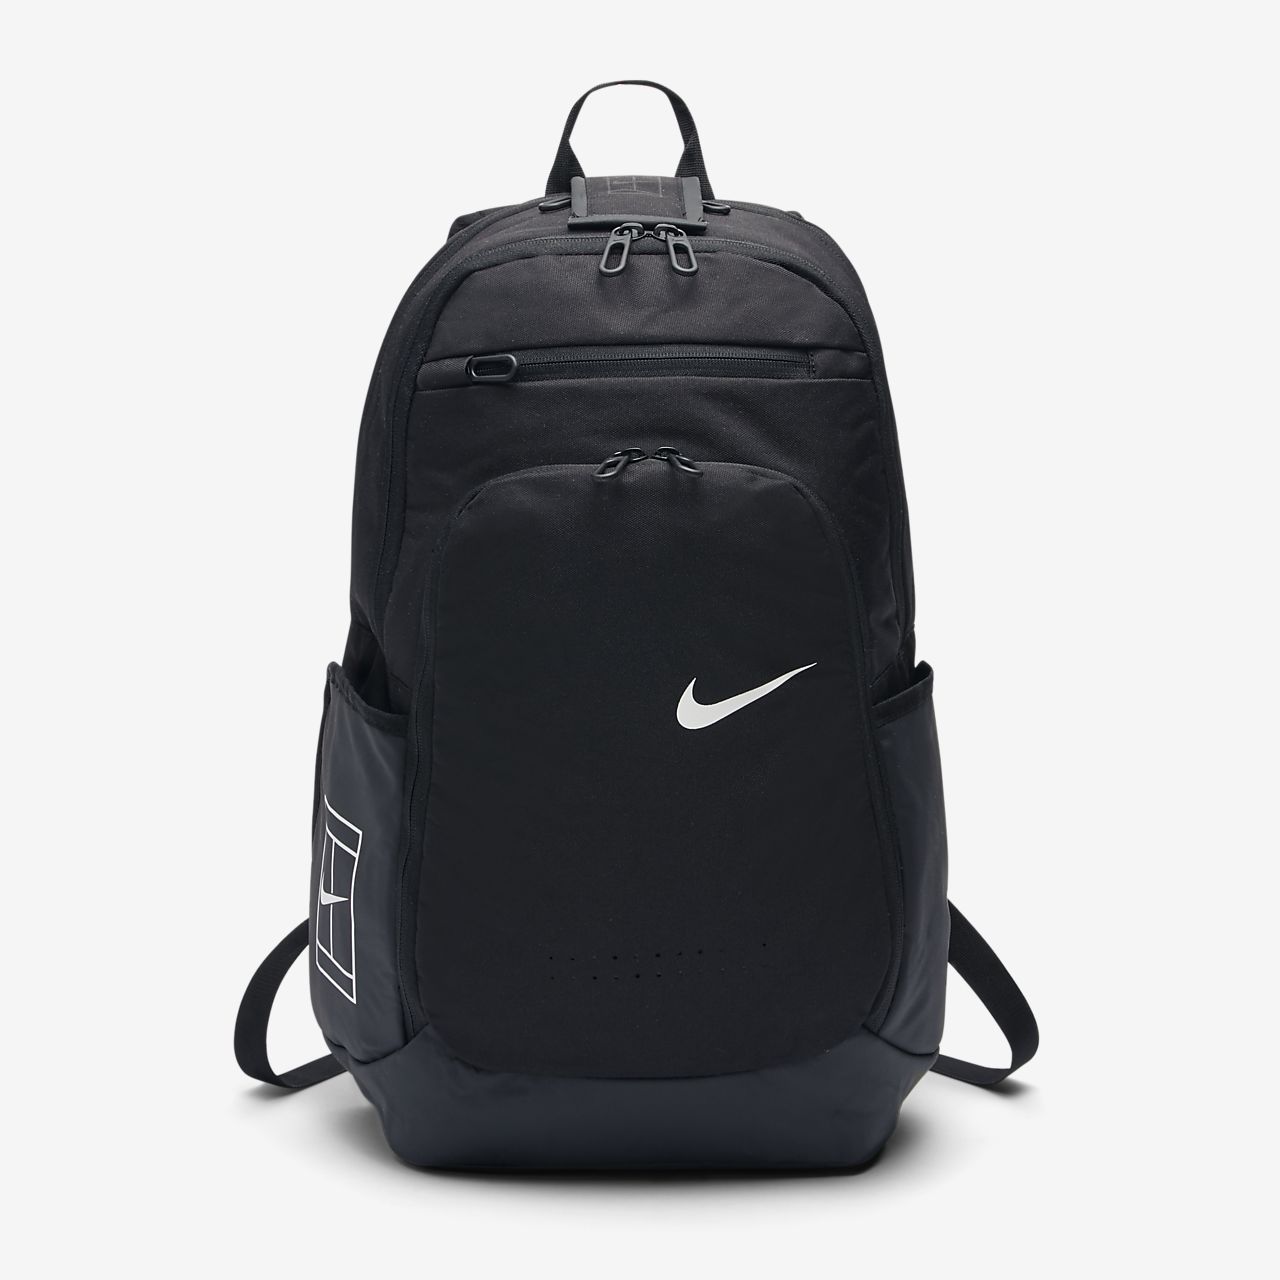 sac a dos nike homme blanche